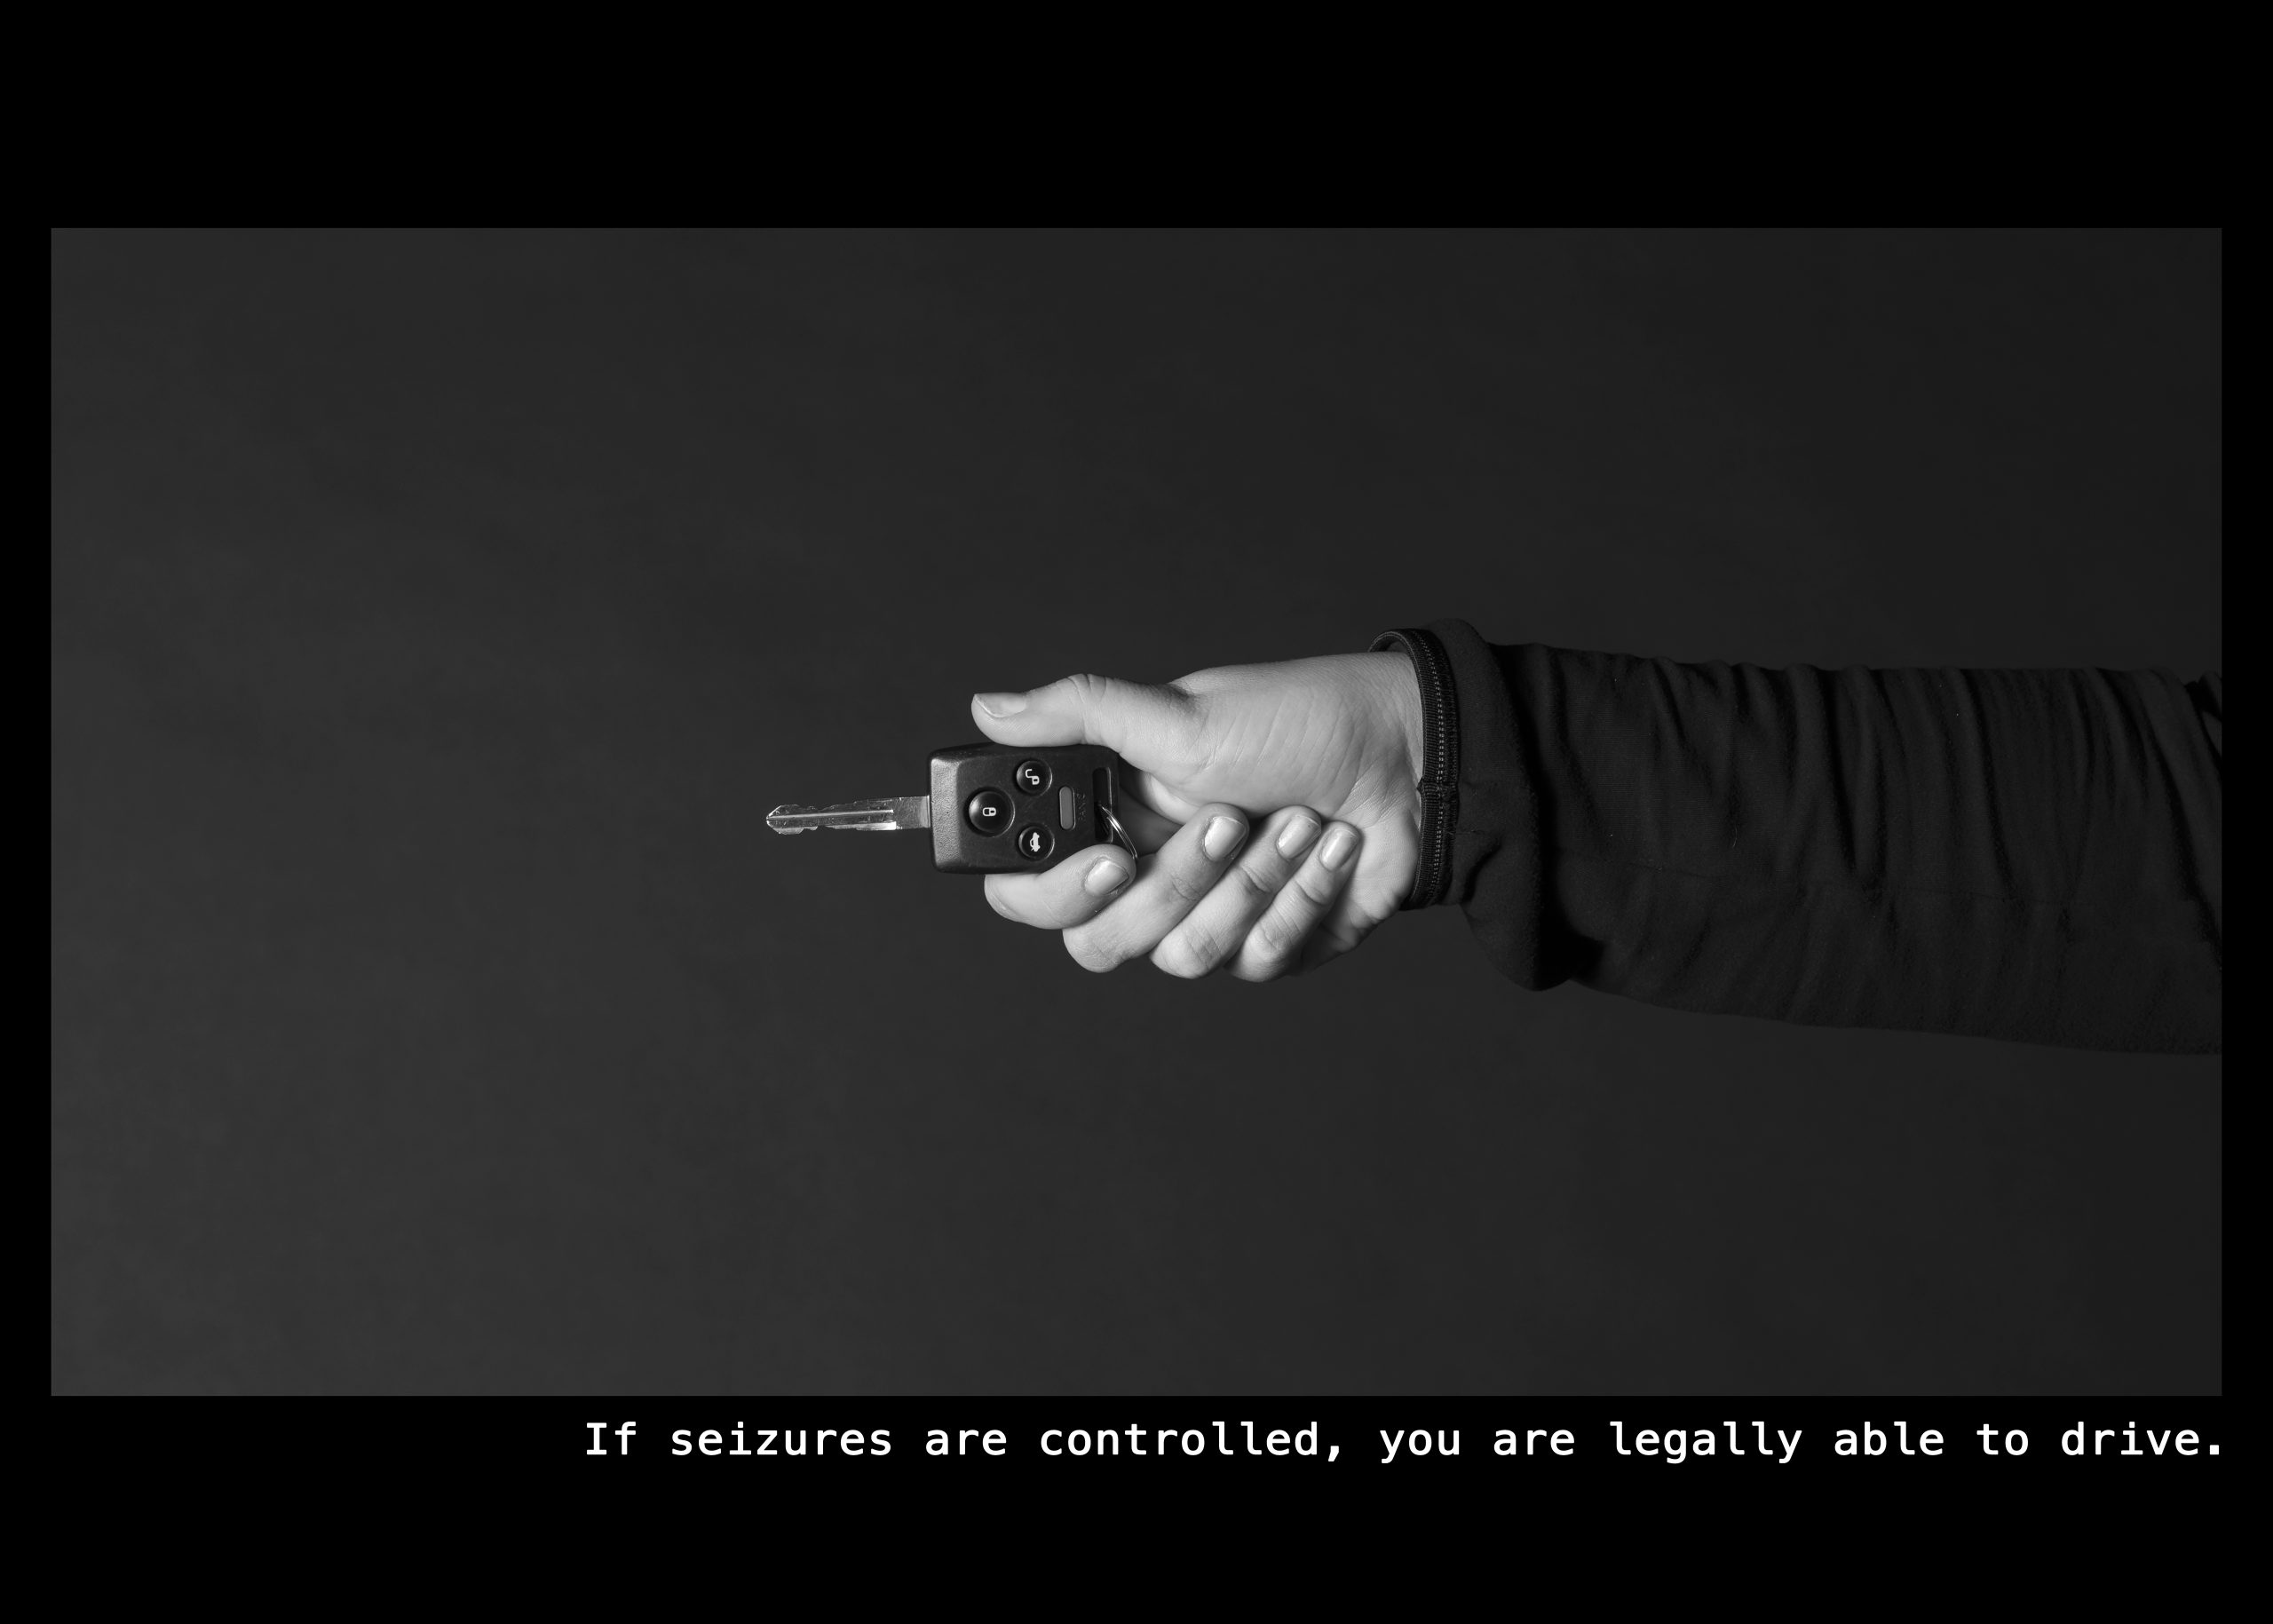 Image of a hand holding out a car key. Text: If seizures are controlled, you are legally able to drive.